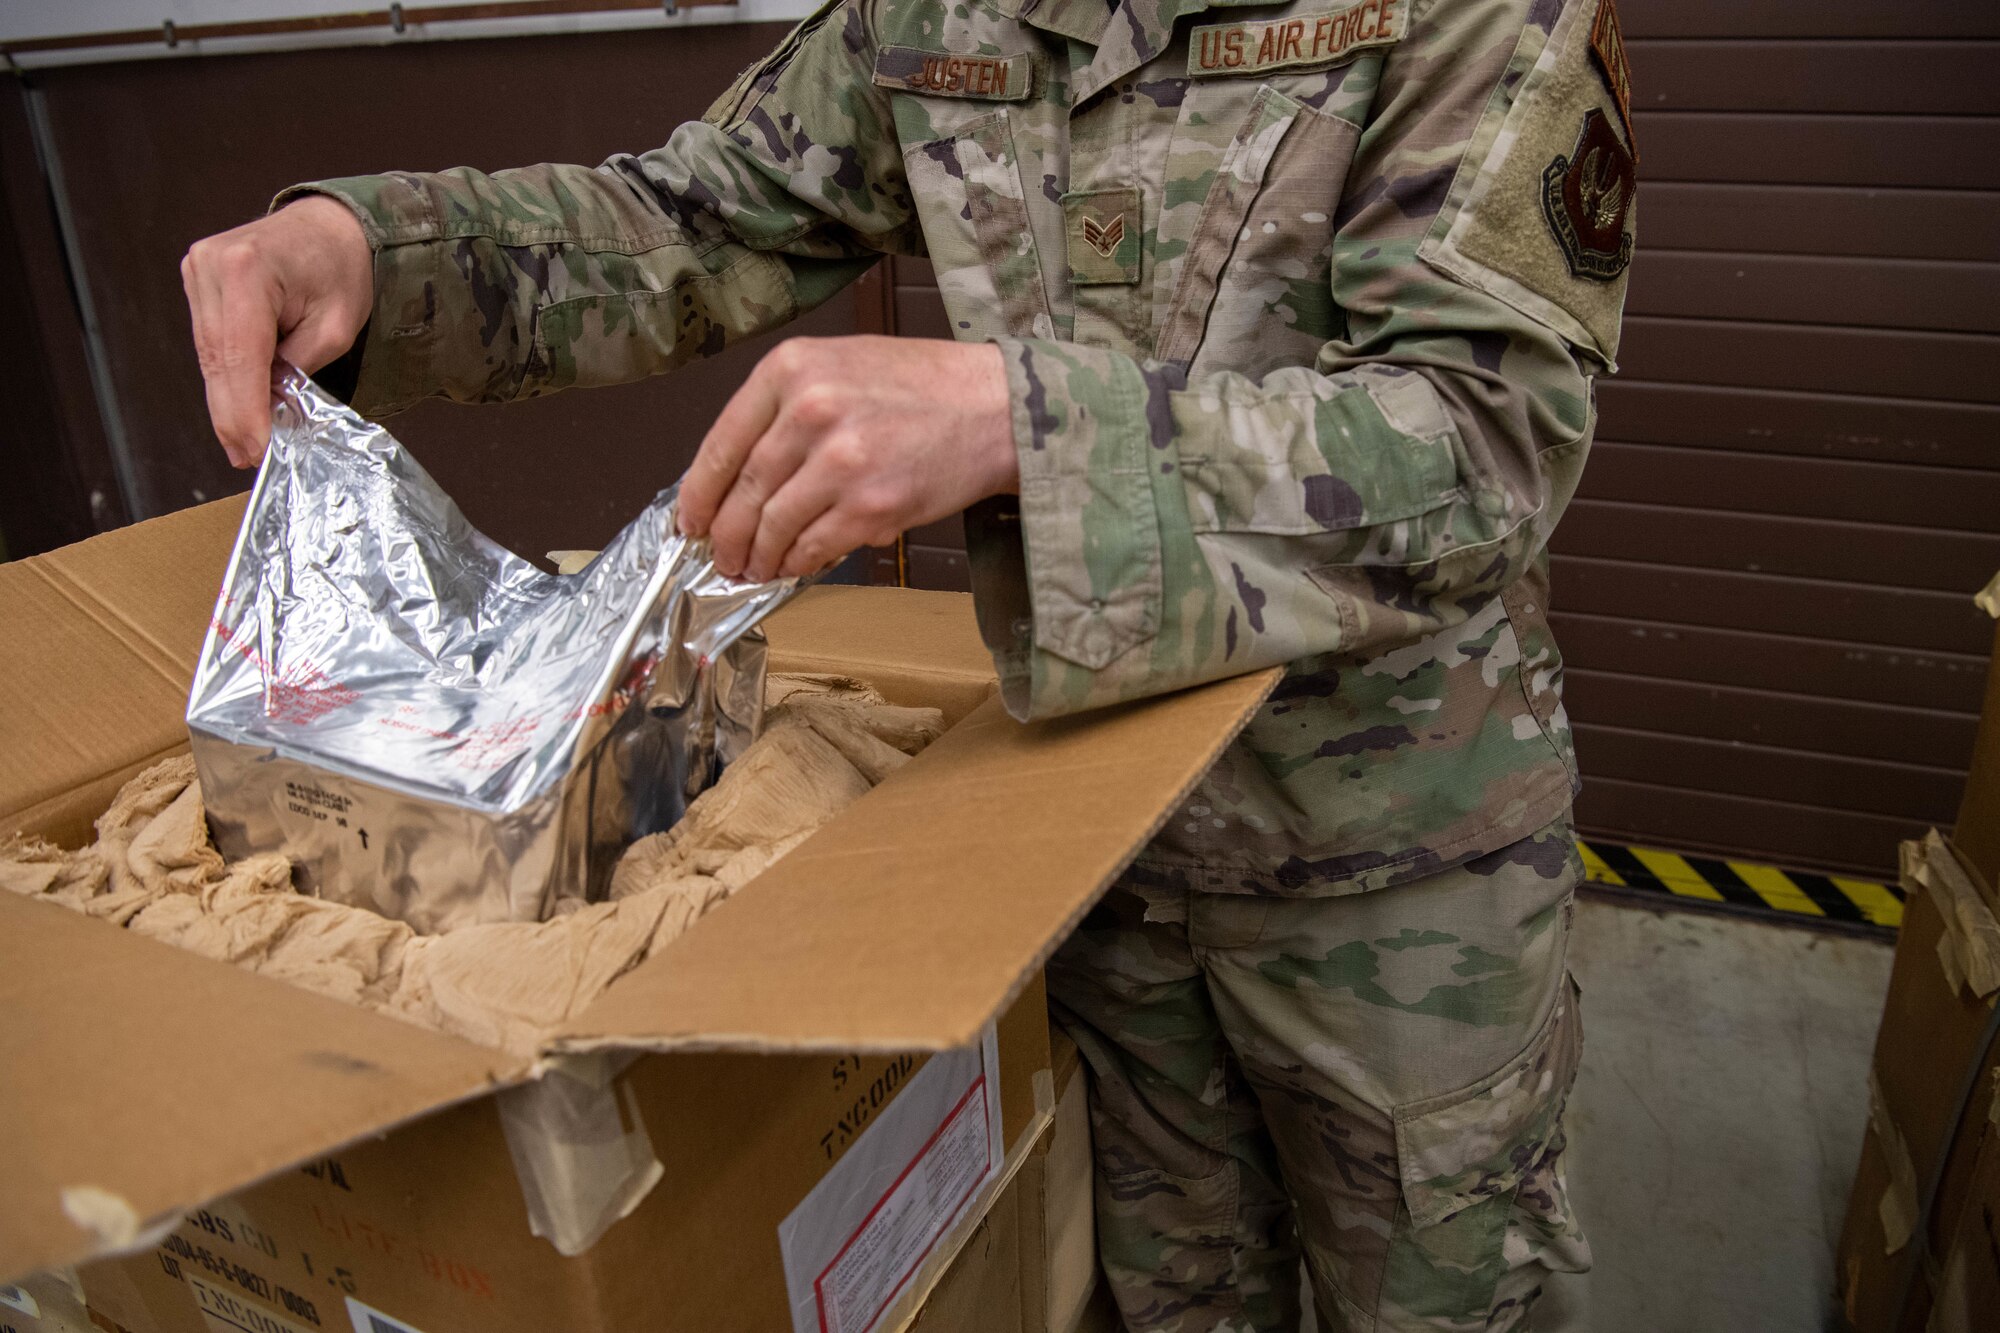 Airman pulling bag out of box